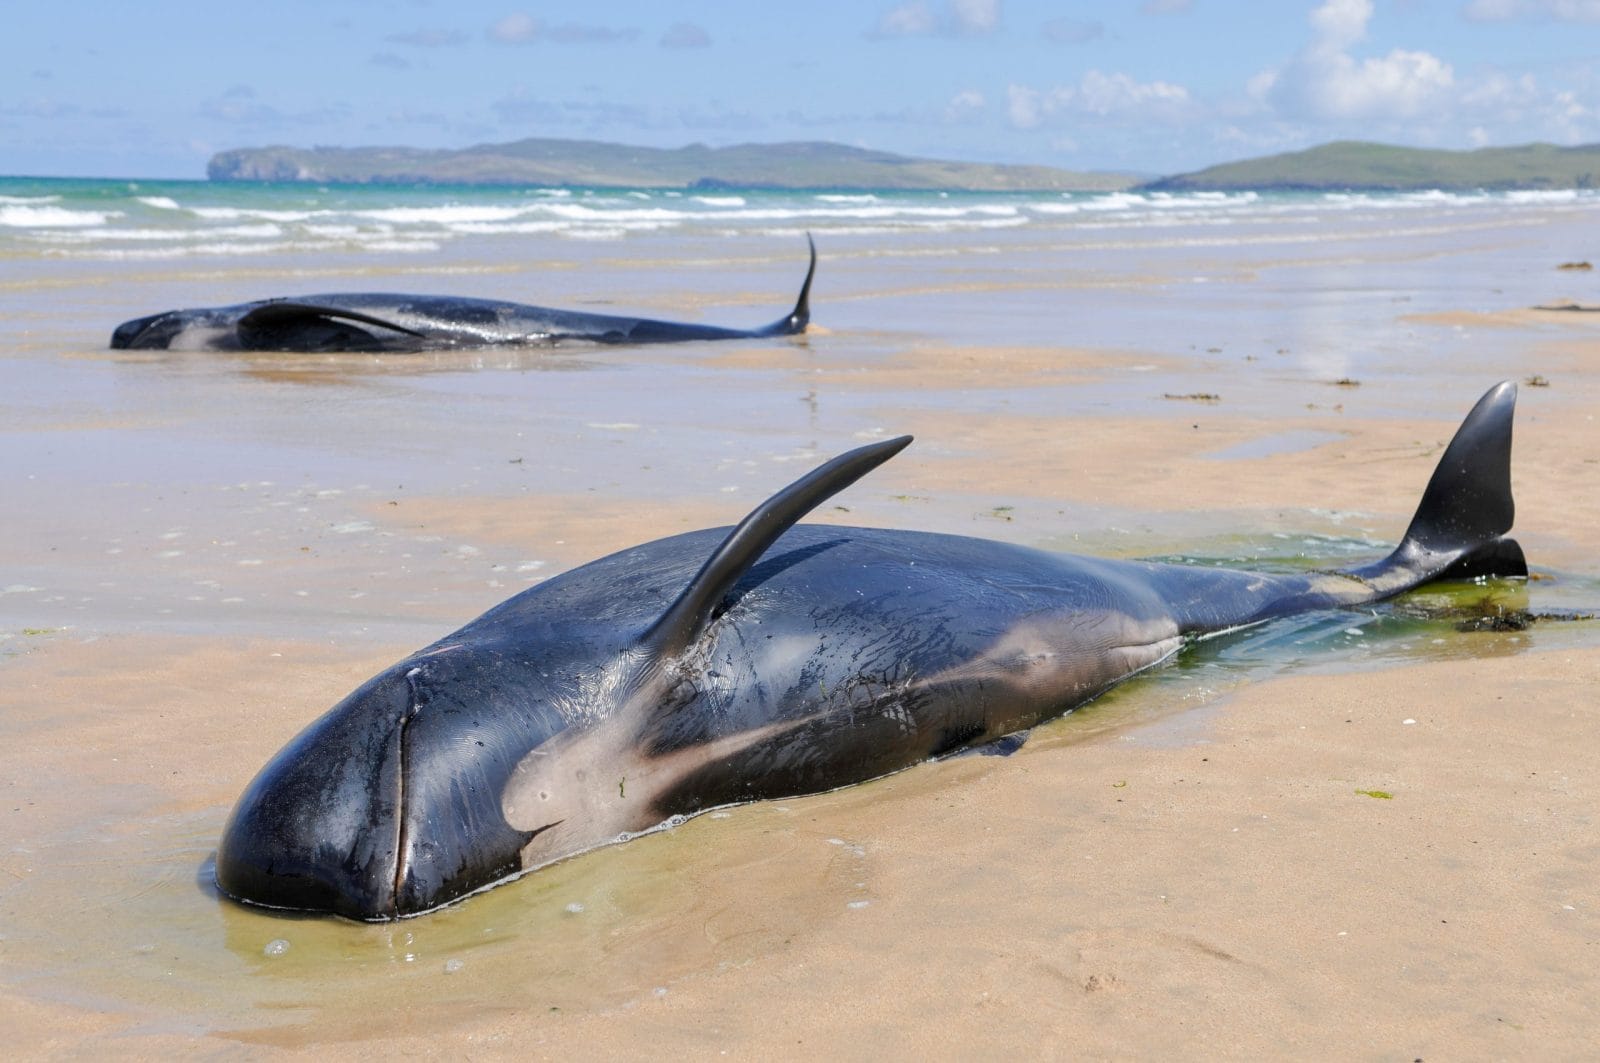 Pod of pilot whales stranded on a beach